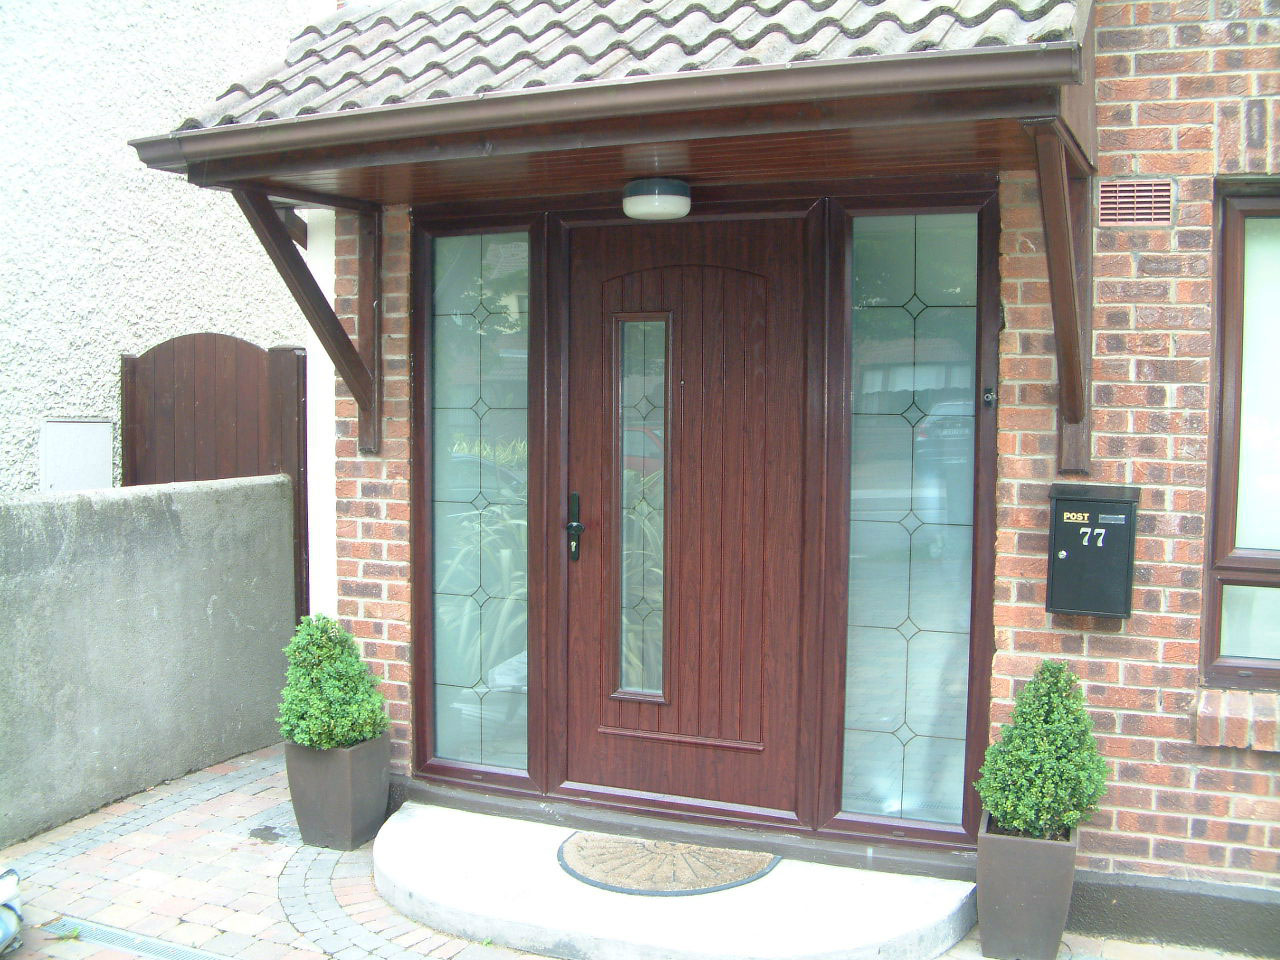 ROSEWOOD PALLADIO ROME DOOR FITTED BY ASGARD WINDOWS IN DUBLIN 14.